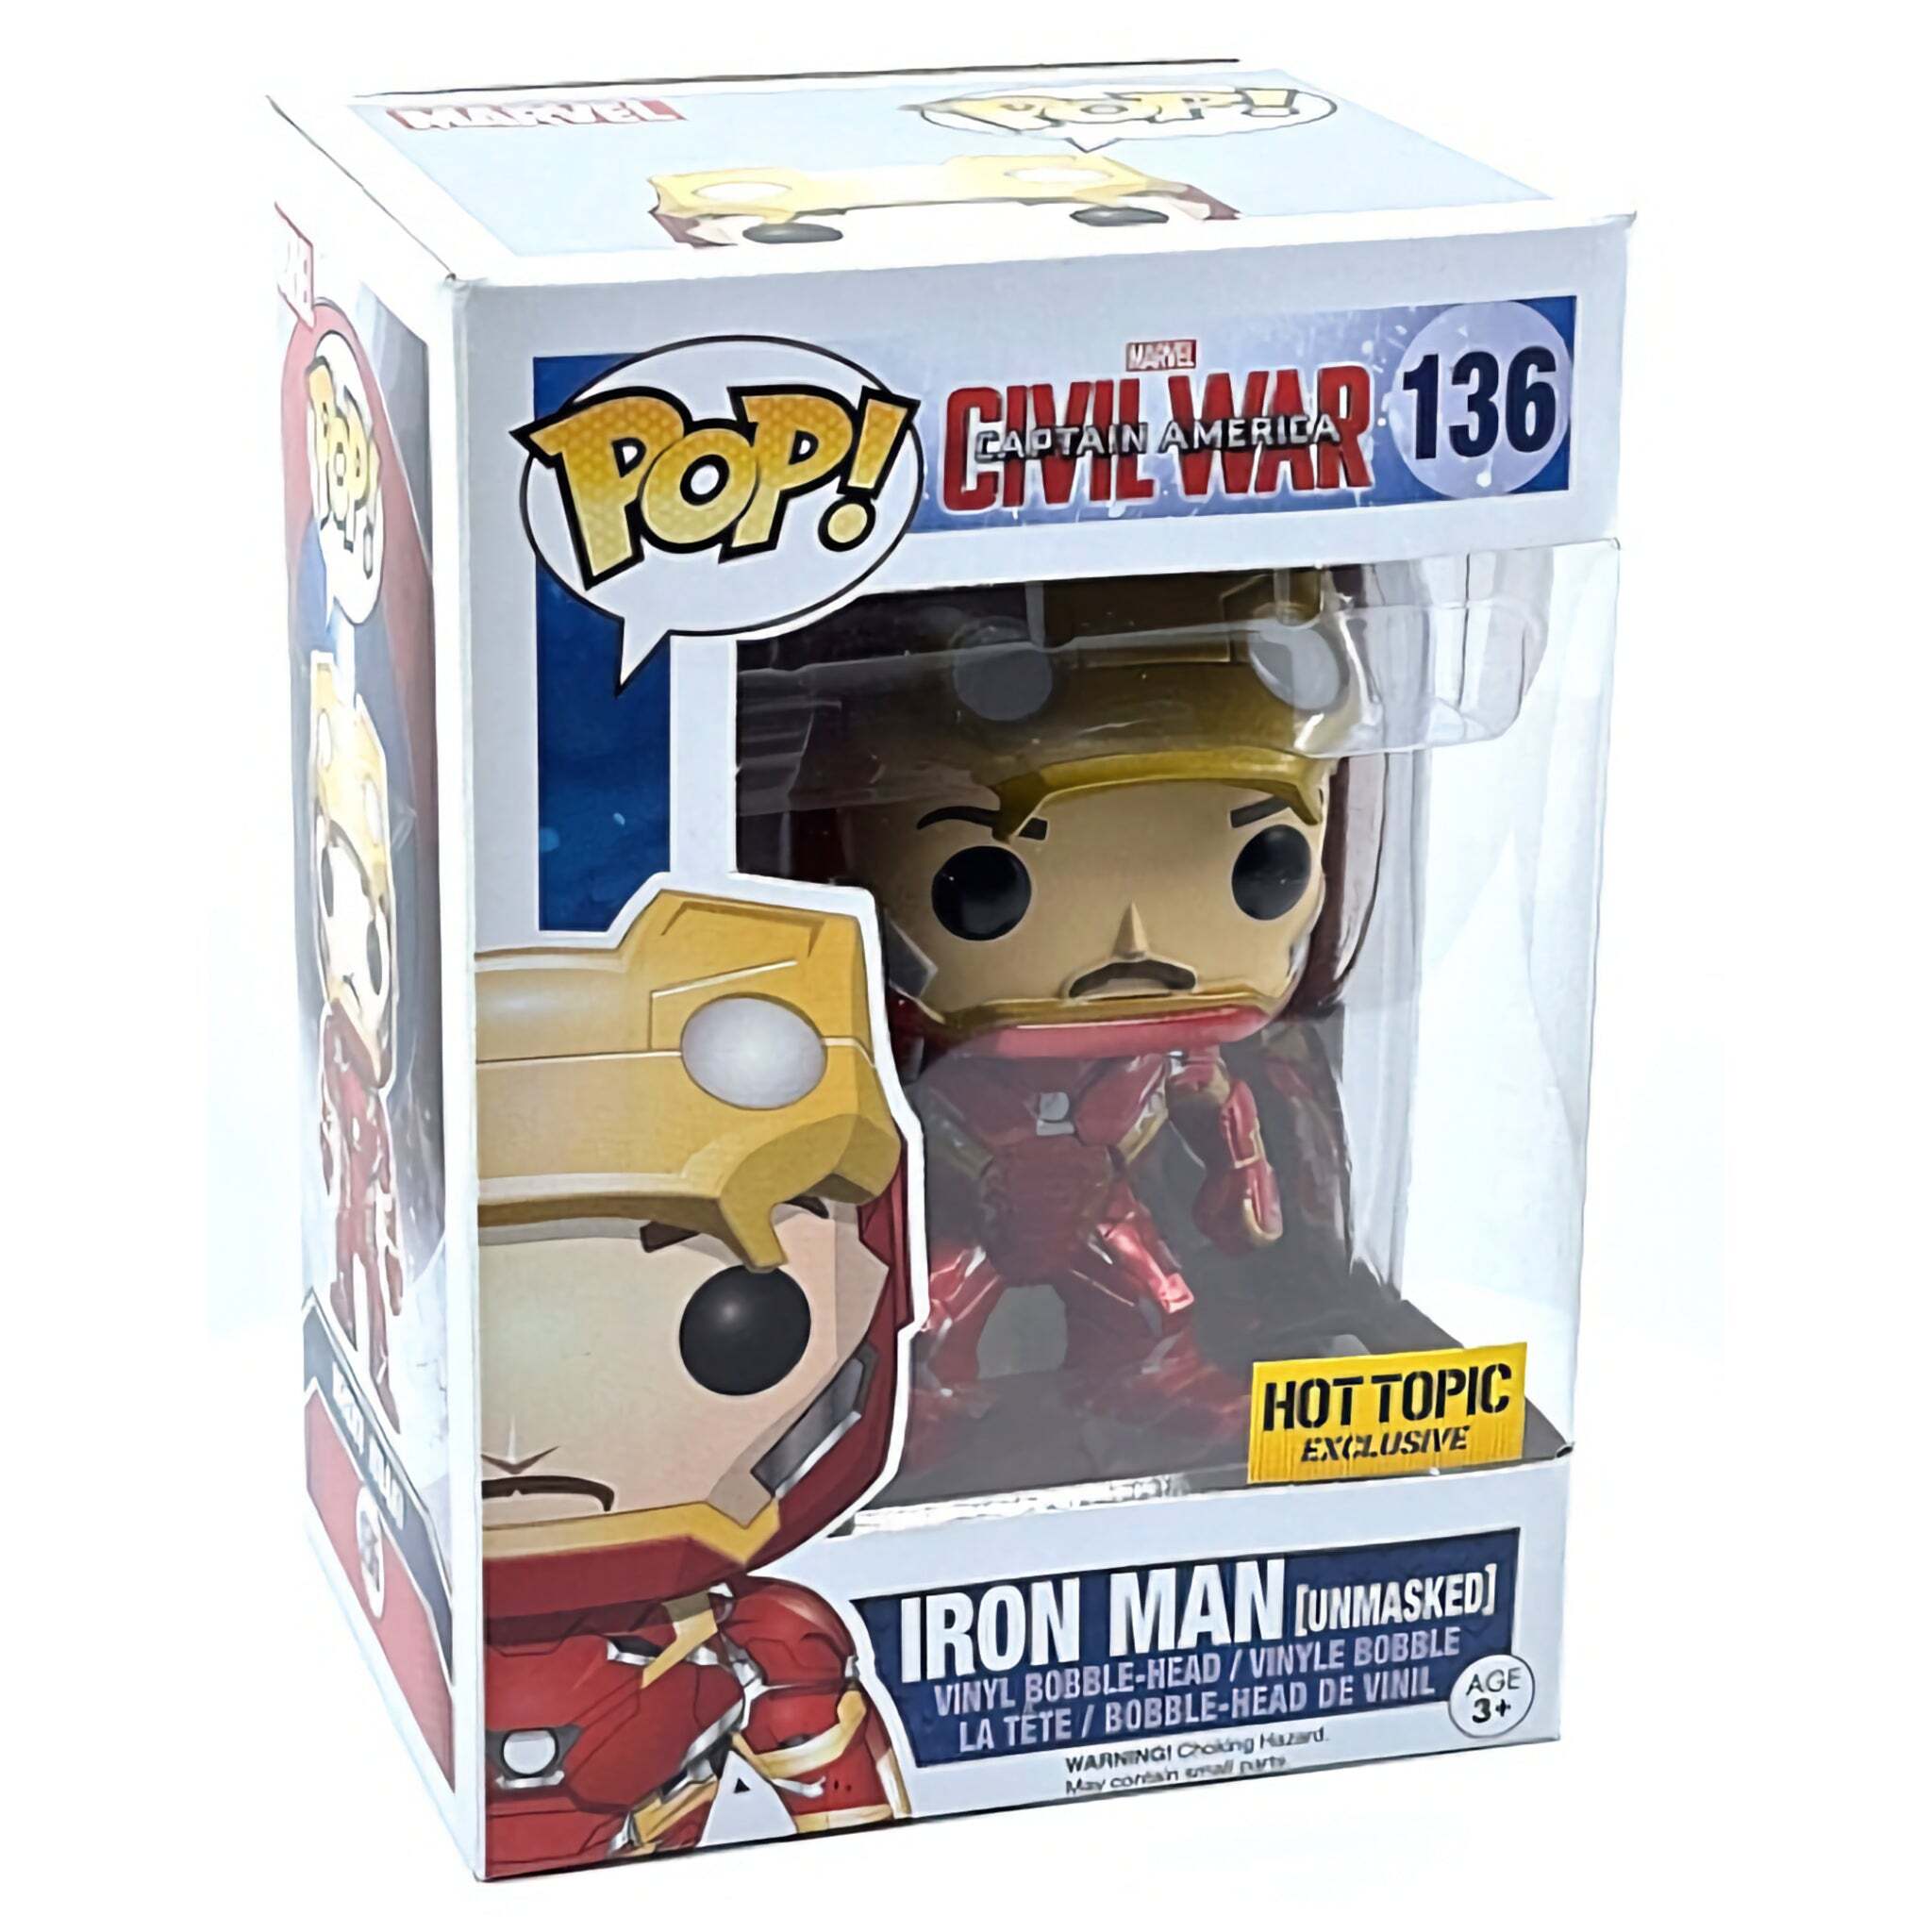 Iron Man [Unmasked] Funko Pop! HOT TOPIC EXCLUSIVE